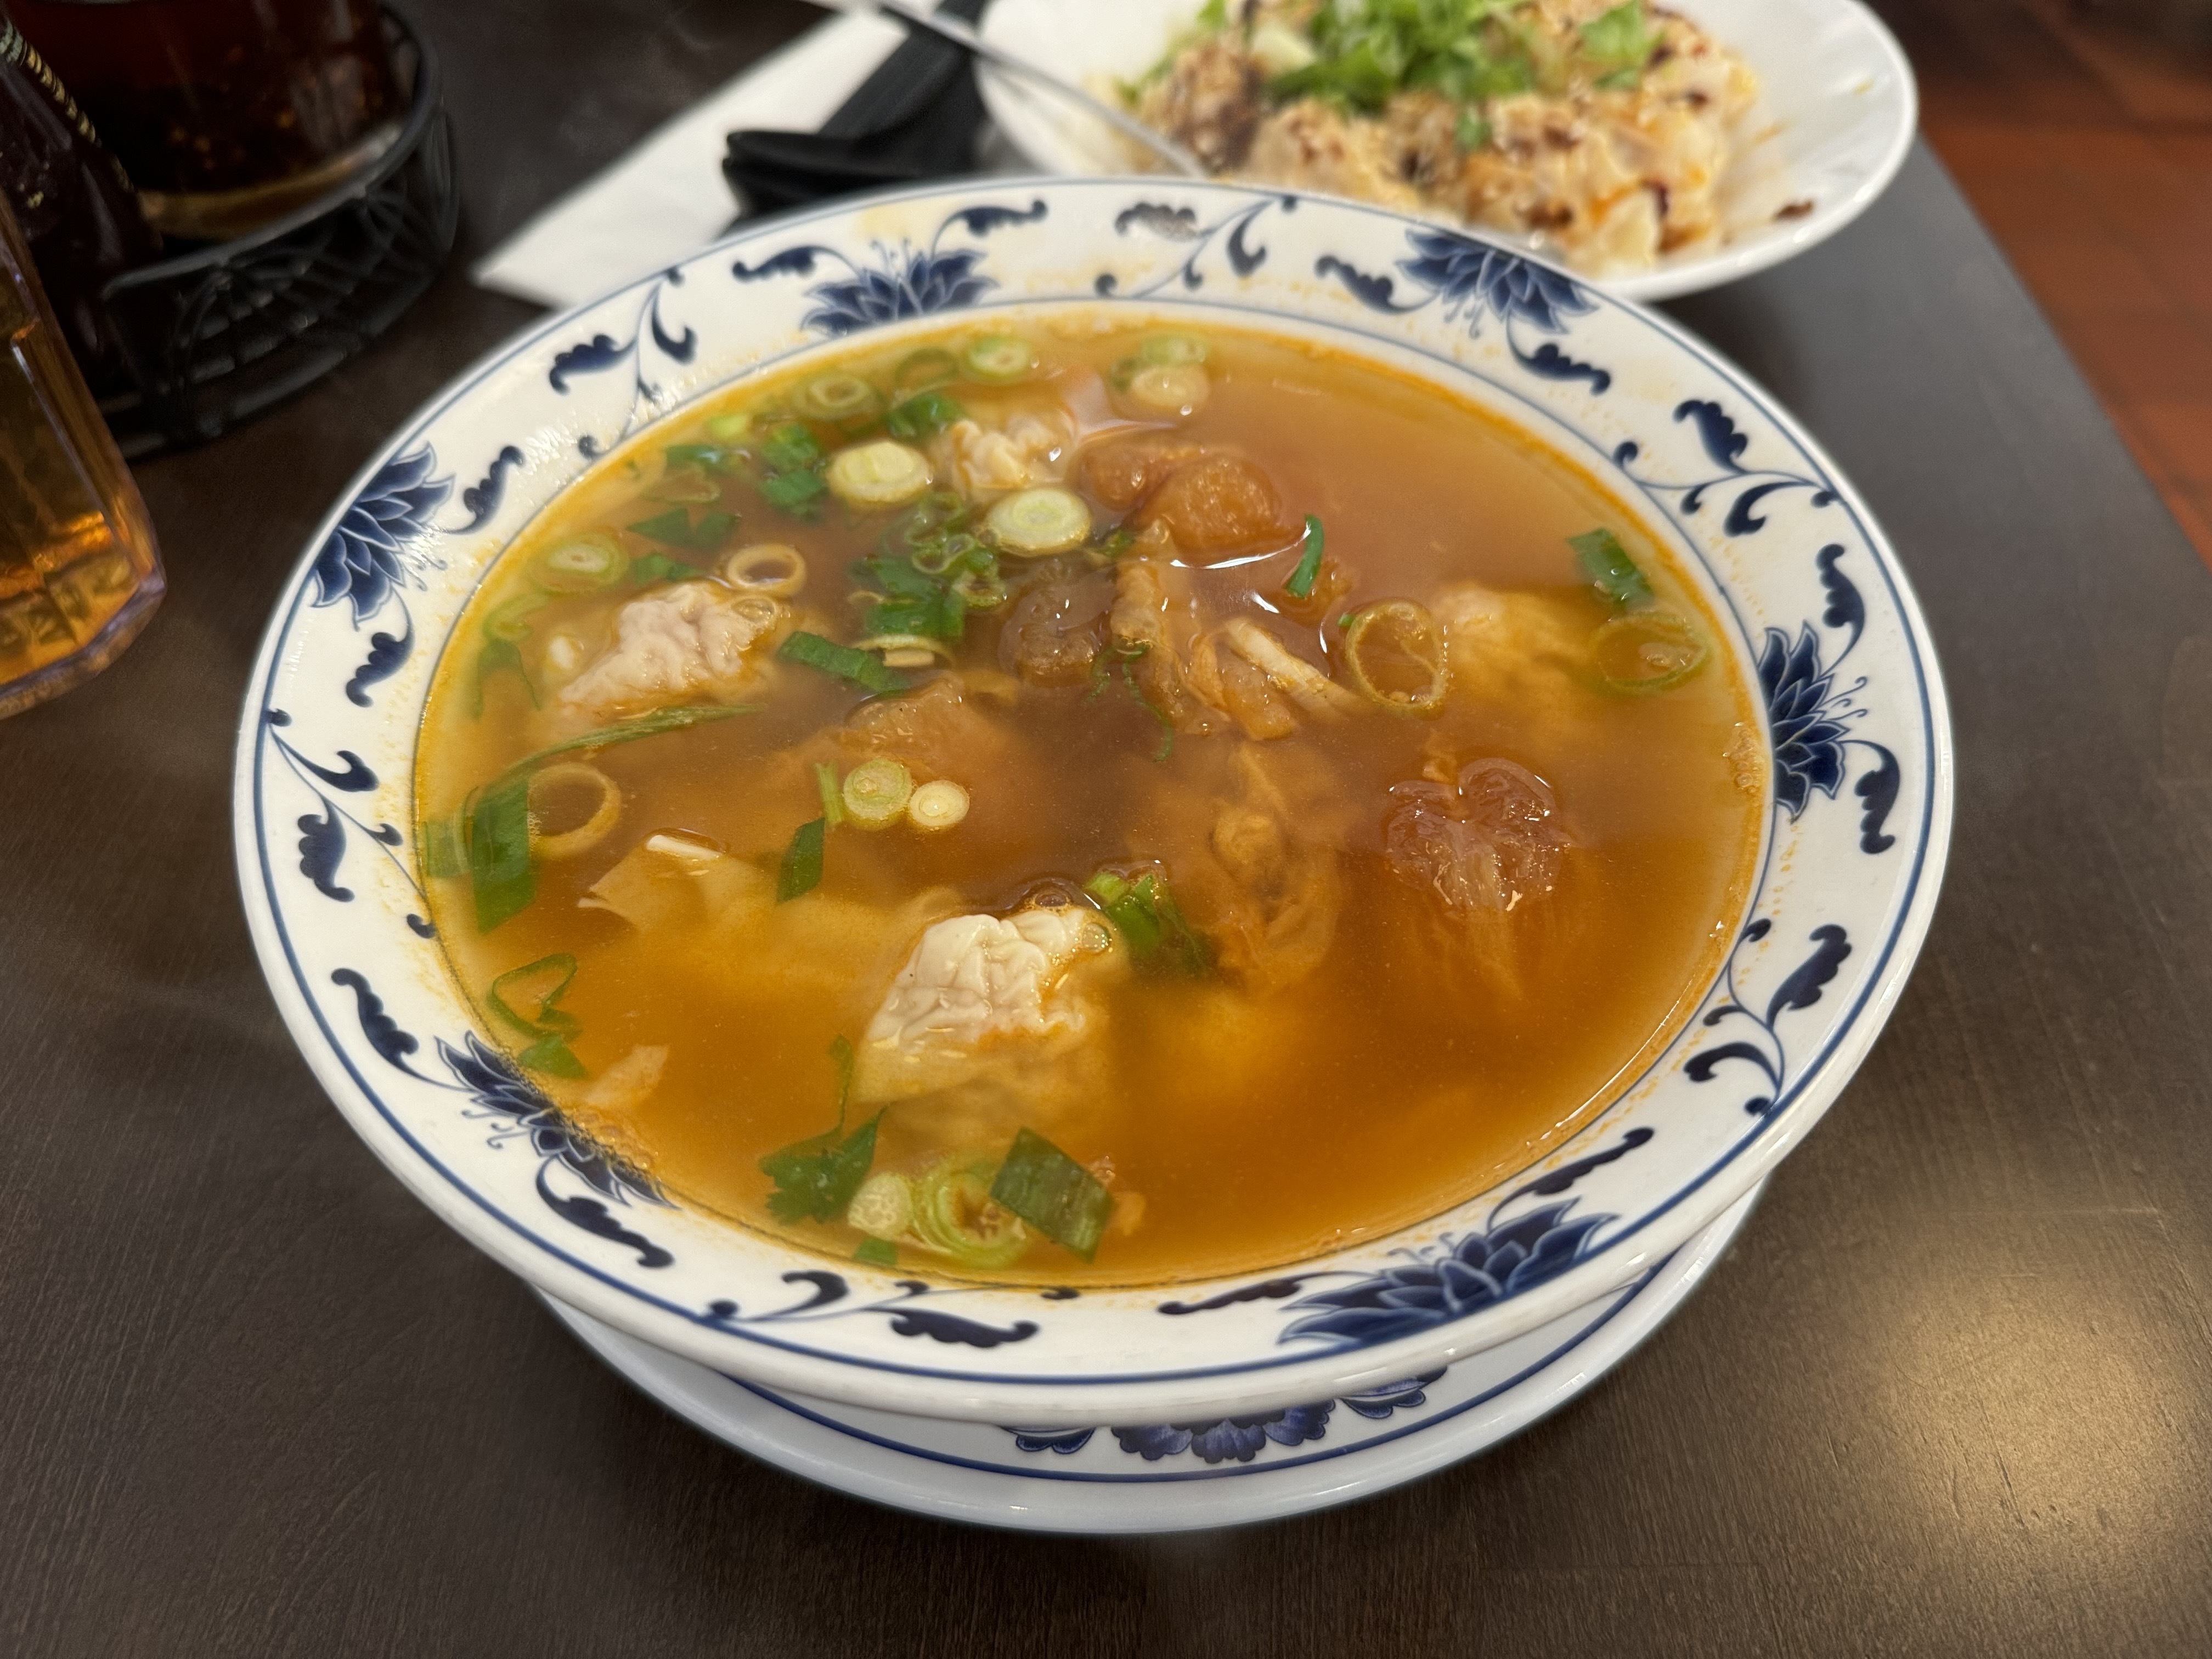 A bowl of soup from Hon’s Wun-Tun House in San Francisco